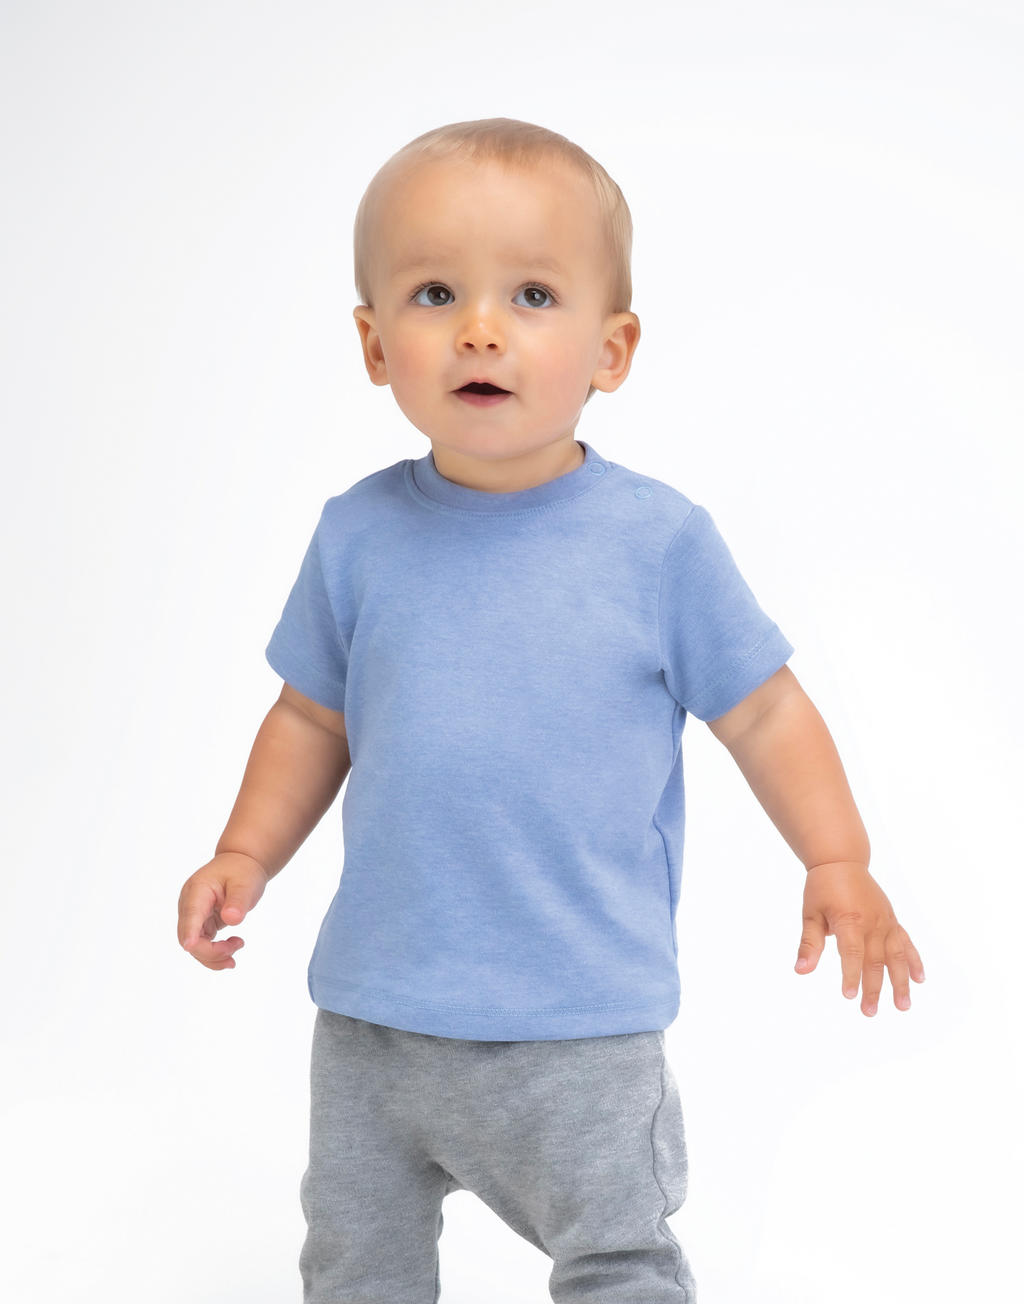  Baby T-Shirt in Farbe White